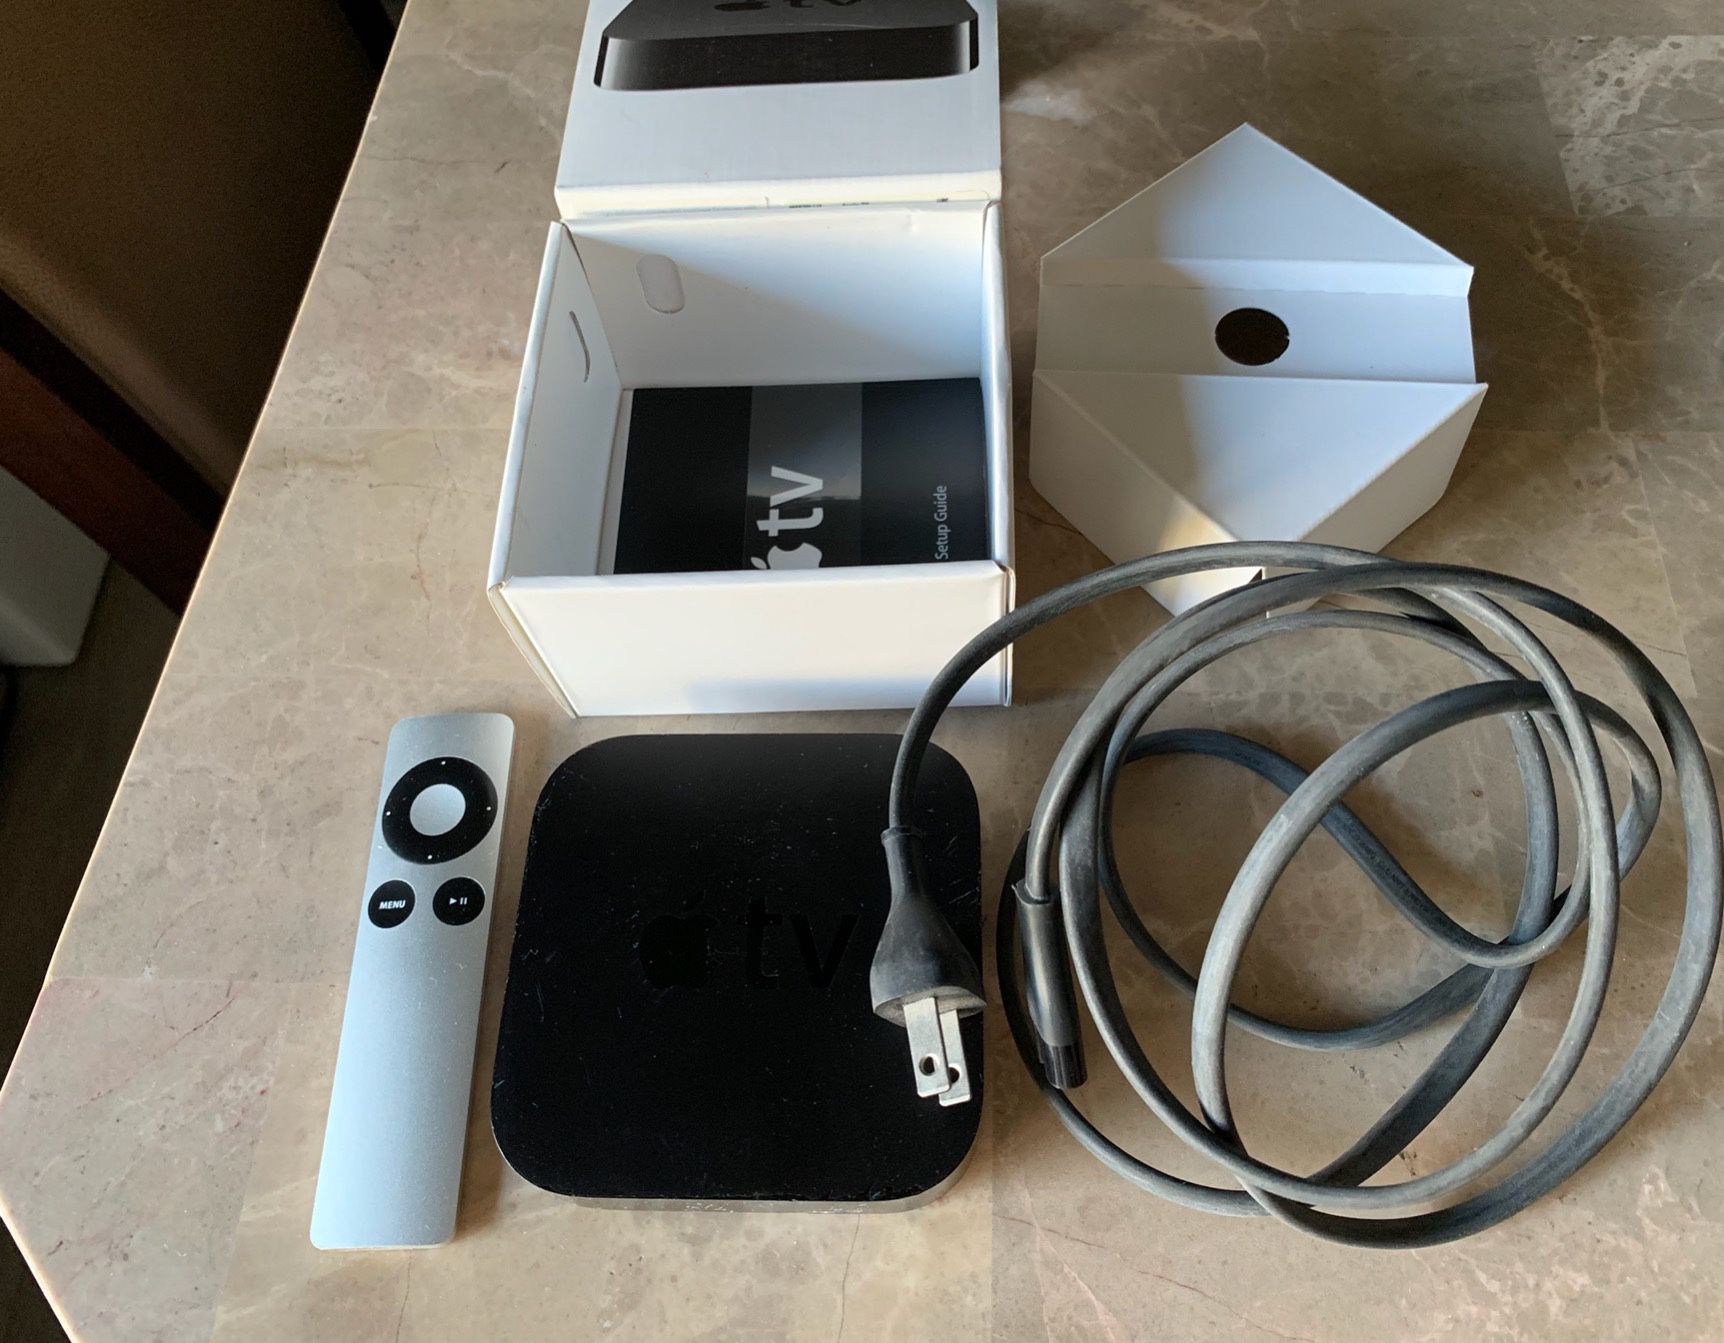 Apple TV (2nd Generation) MC572LL/A 8GB Media Streamer with cable and remote and the box